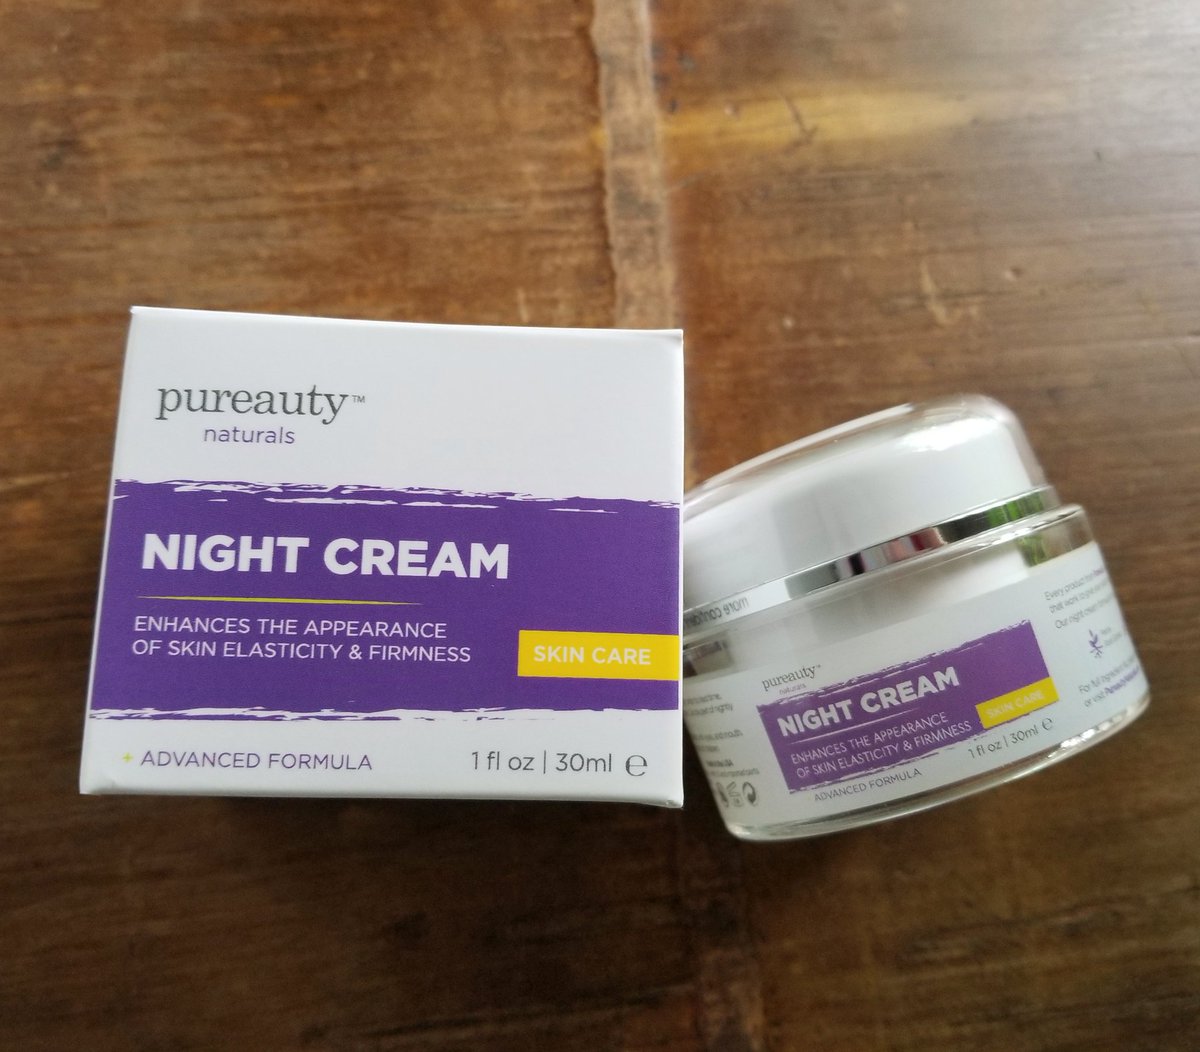 Pureauty Naturals' Night Cream made to firm the skin & improve texture W/ Peony Root Extract, VitaminC & Lavender Oil. I've been using this product for a few days-I feel softer skin-tho I wake w/ my skin feeling dry and unhappy. 
pureautynaturals.com/products/night…
#PureautyNaturals #ad